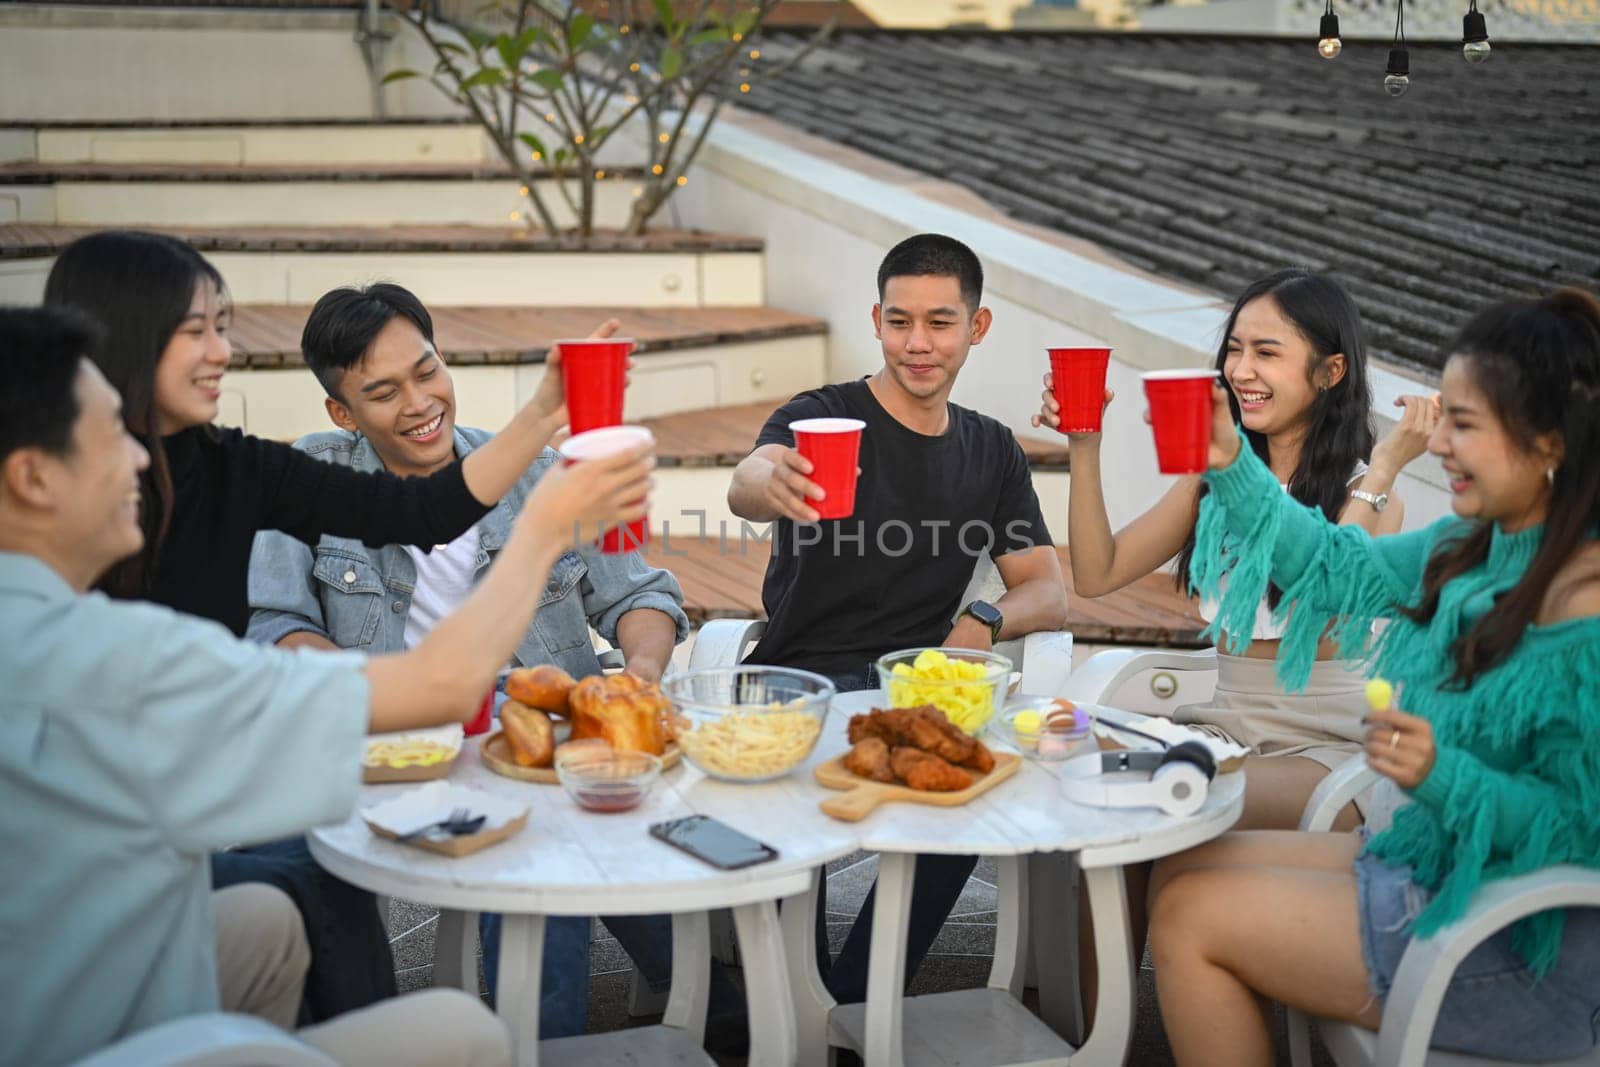 Group of young friends having fun, laughting and drinking beer at weekend celebration.